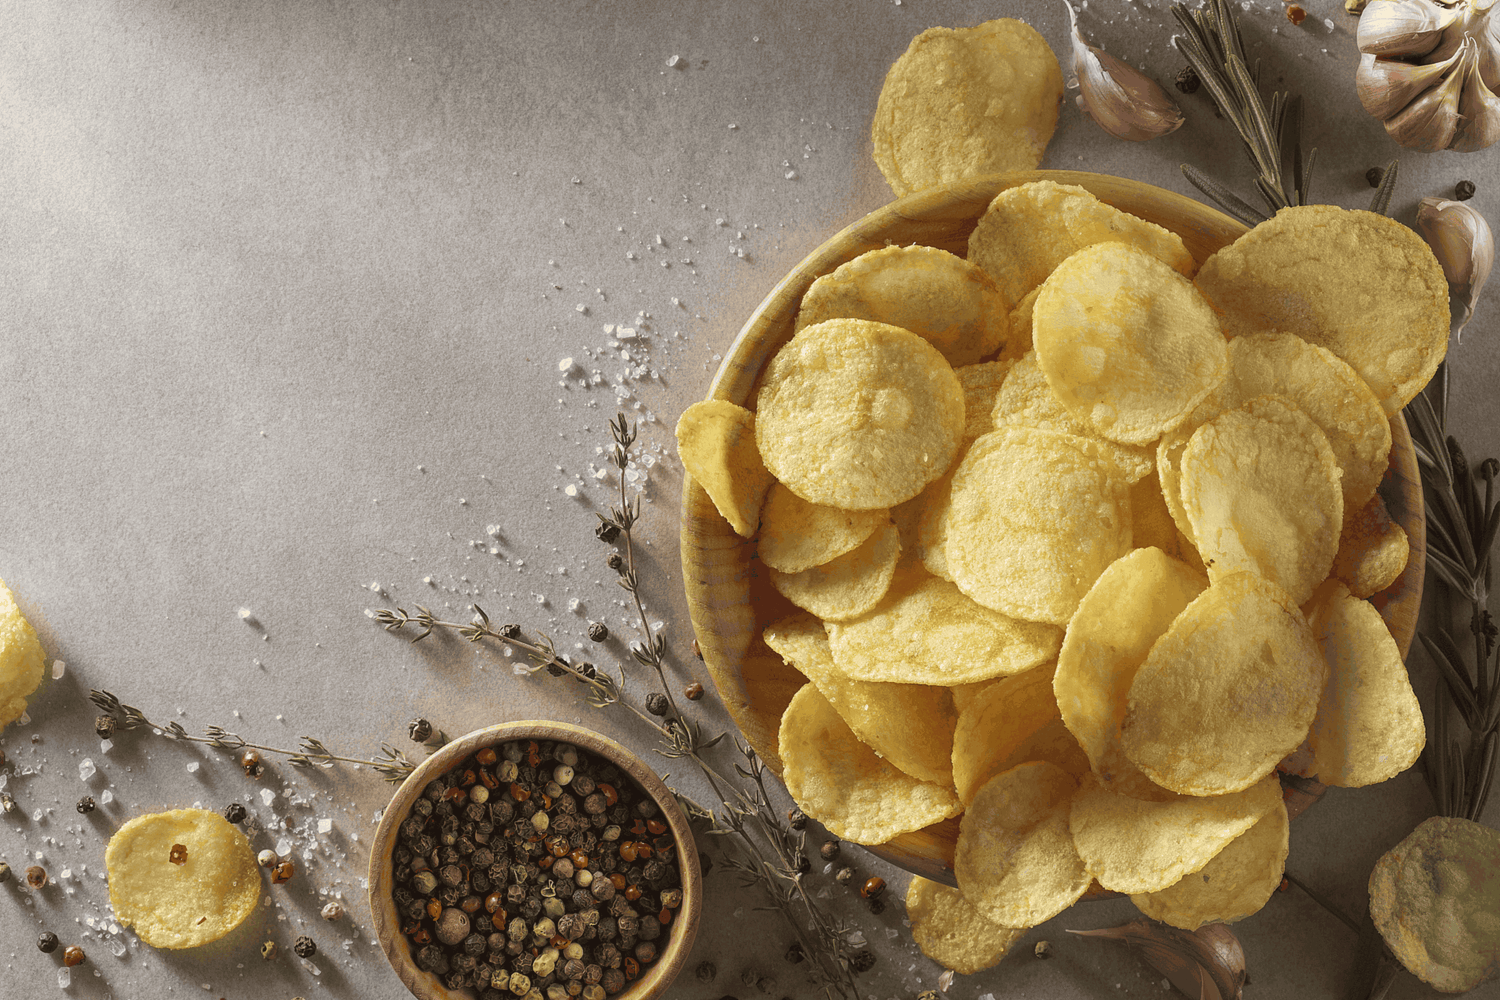 The X&E Air Fryer is a versatile kitchen appliance that can be used to cook a wide variety of foods, including potato chips.